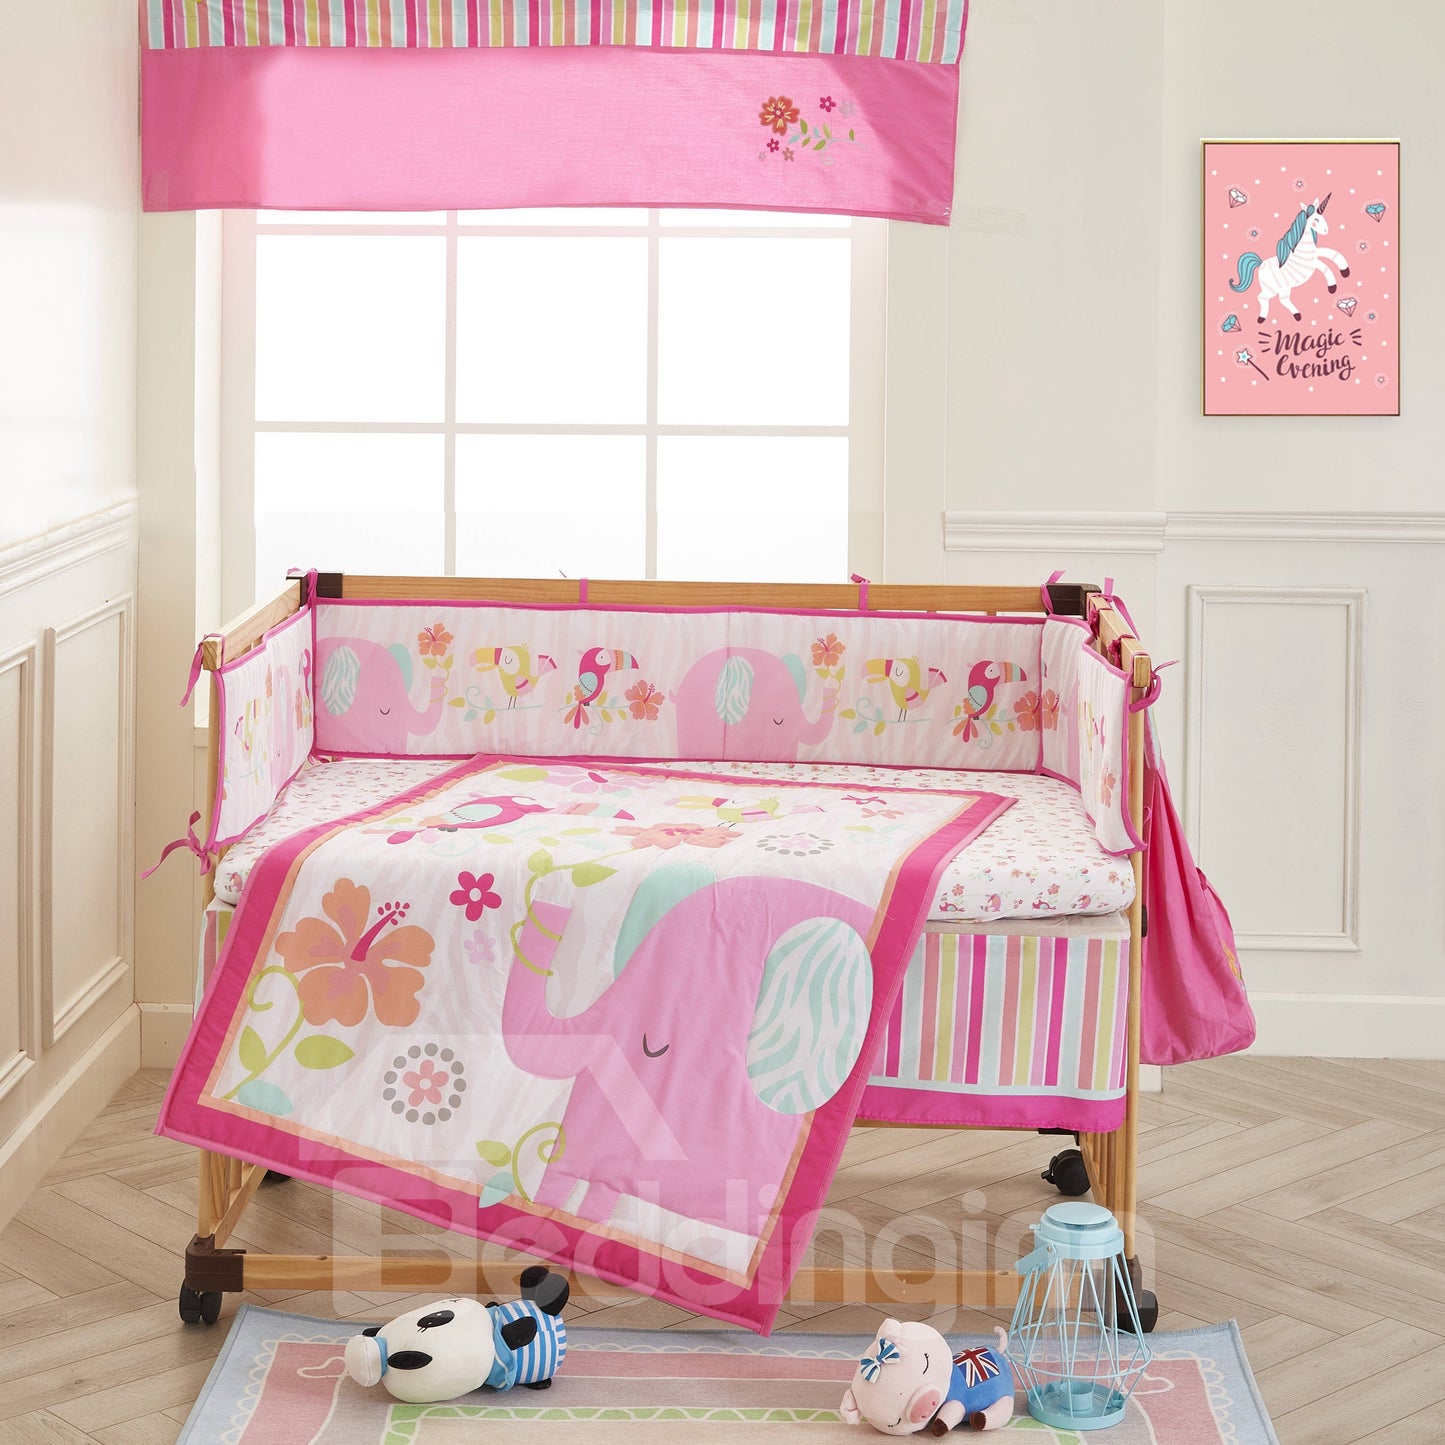 Elephant and Flower Printed Pink 6-Piece Baby Nursery Crib Bedding Sets